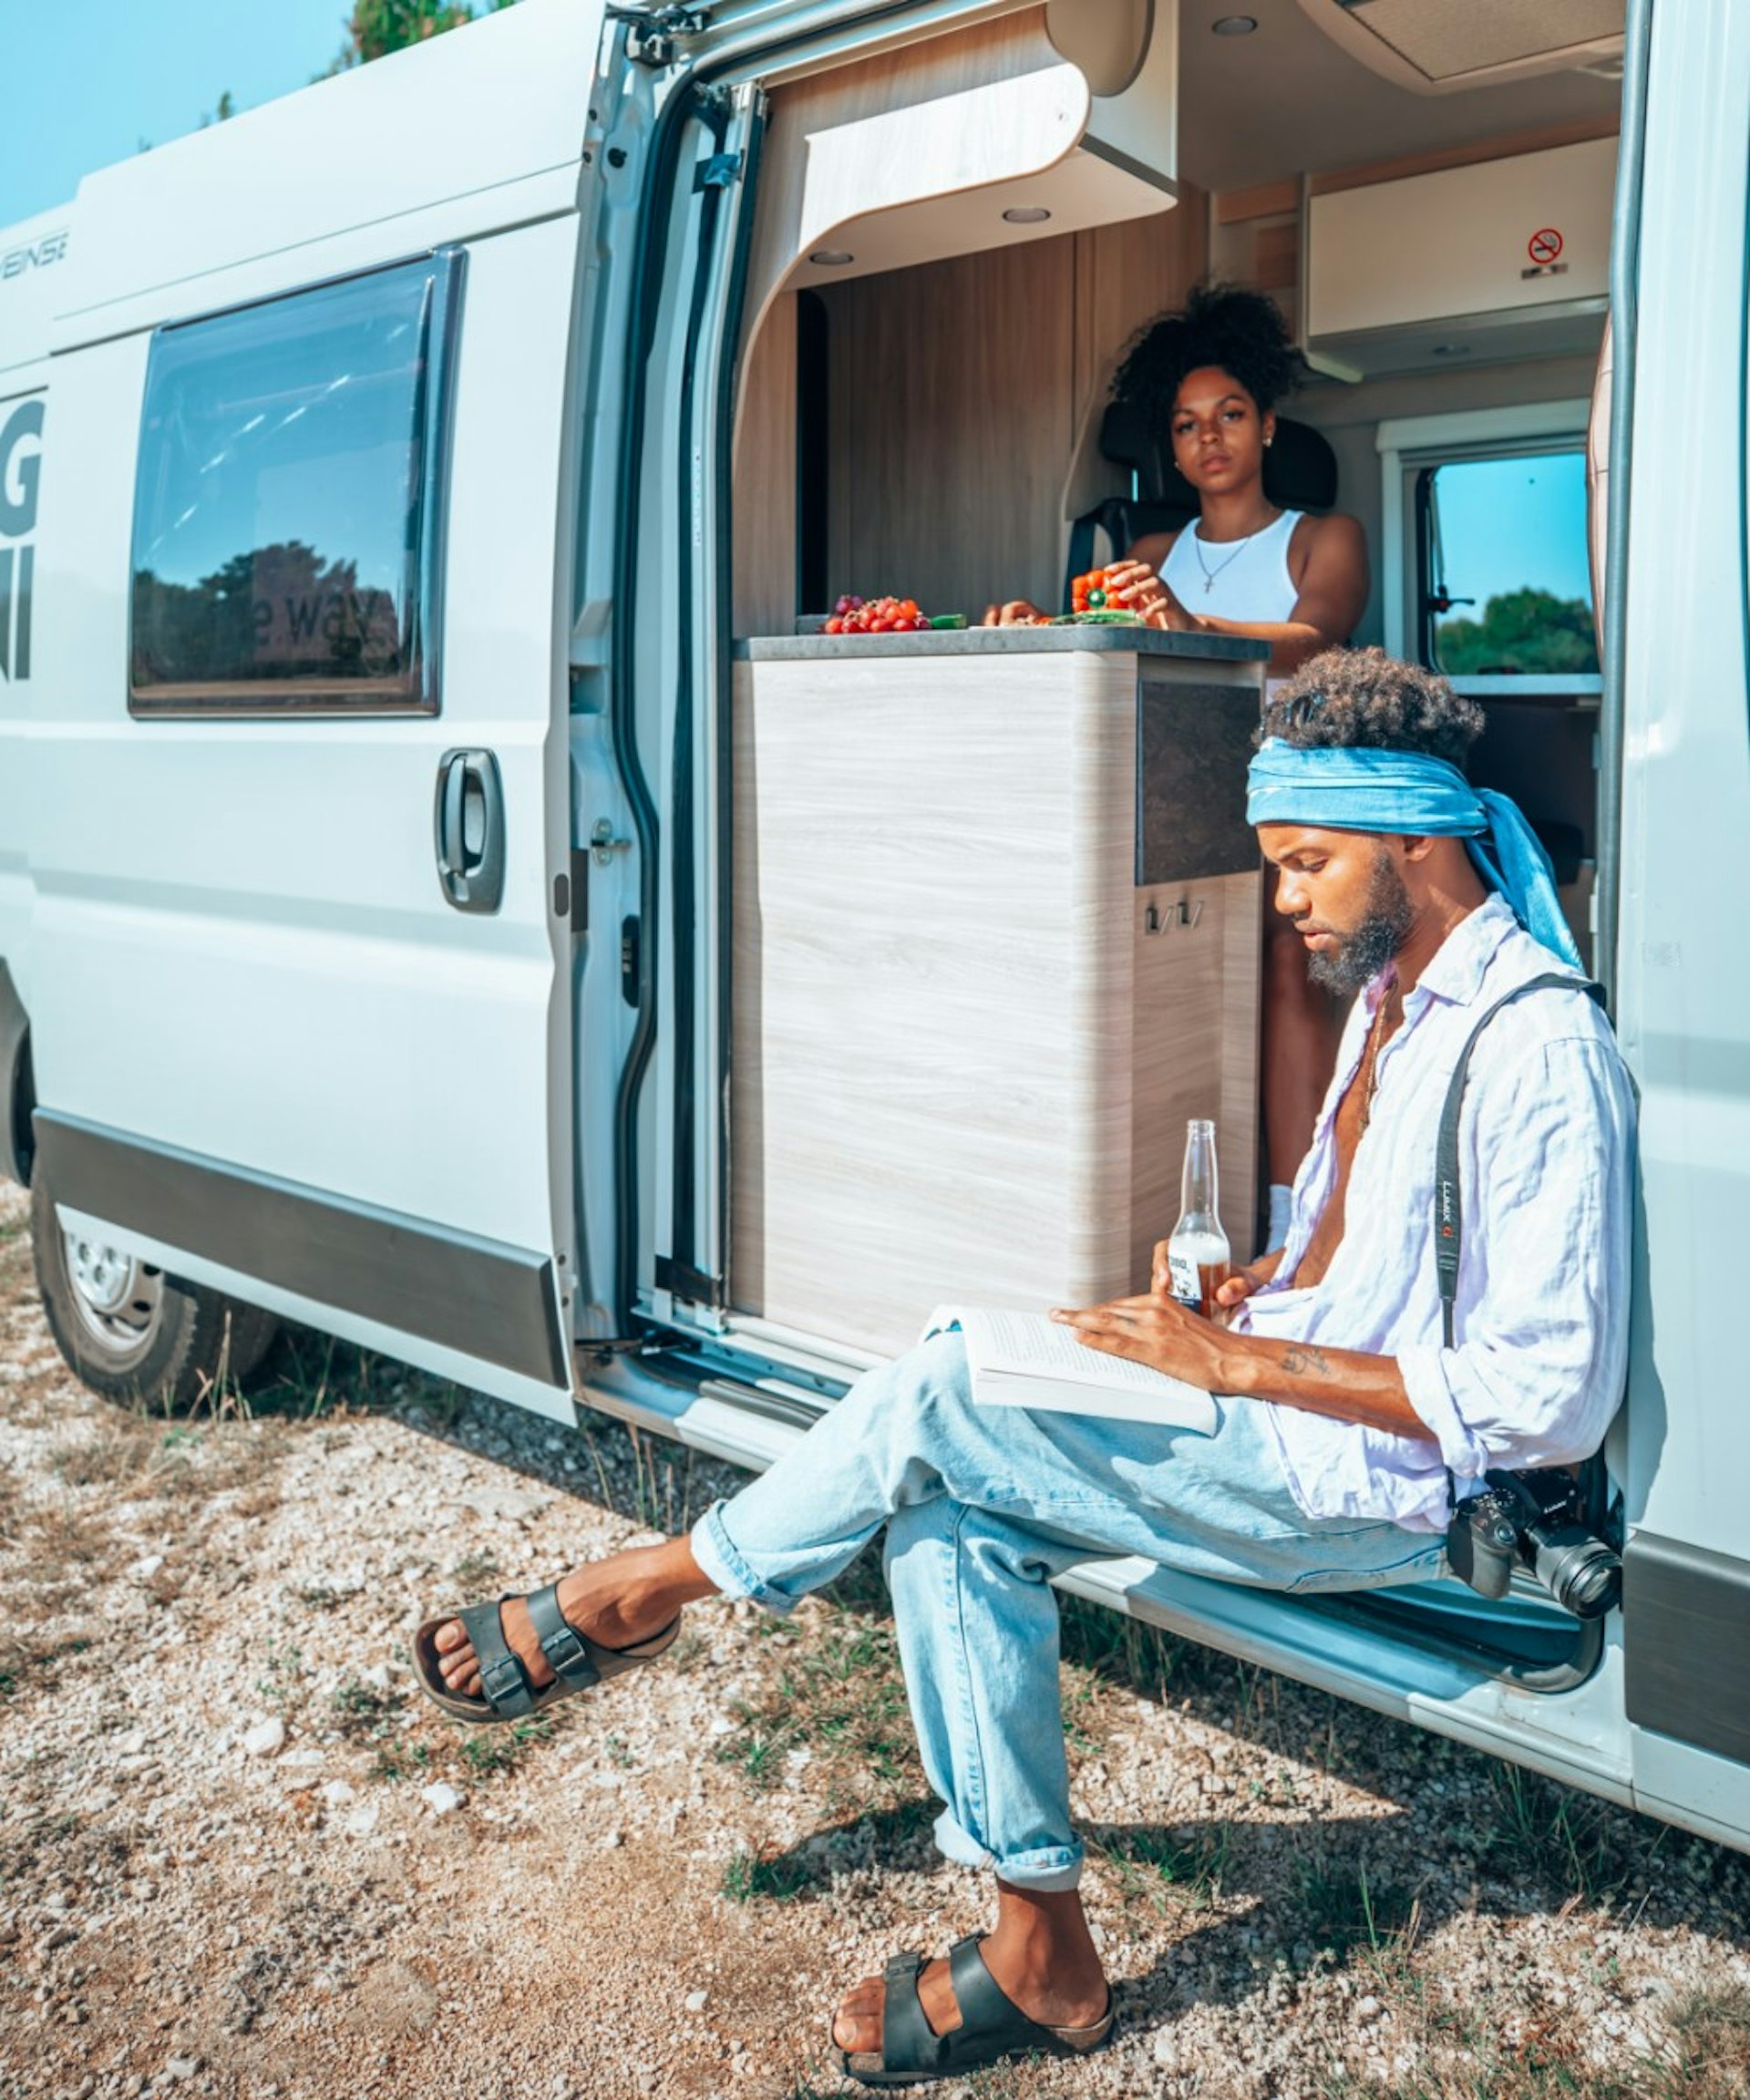 A man and woman sitting in a campervan and looking out